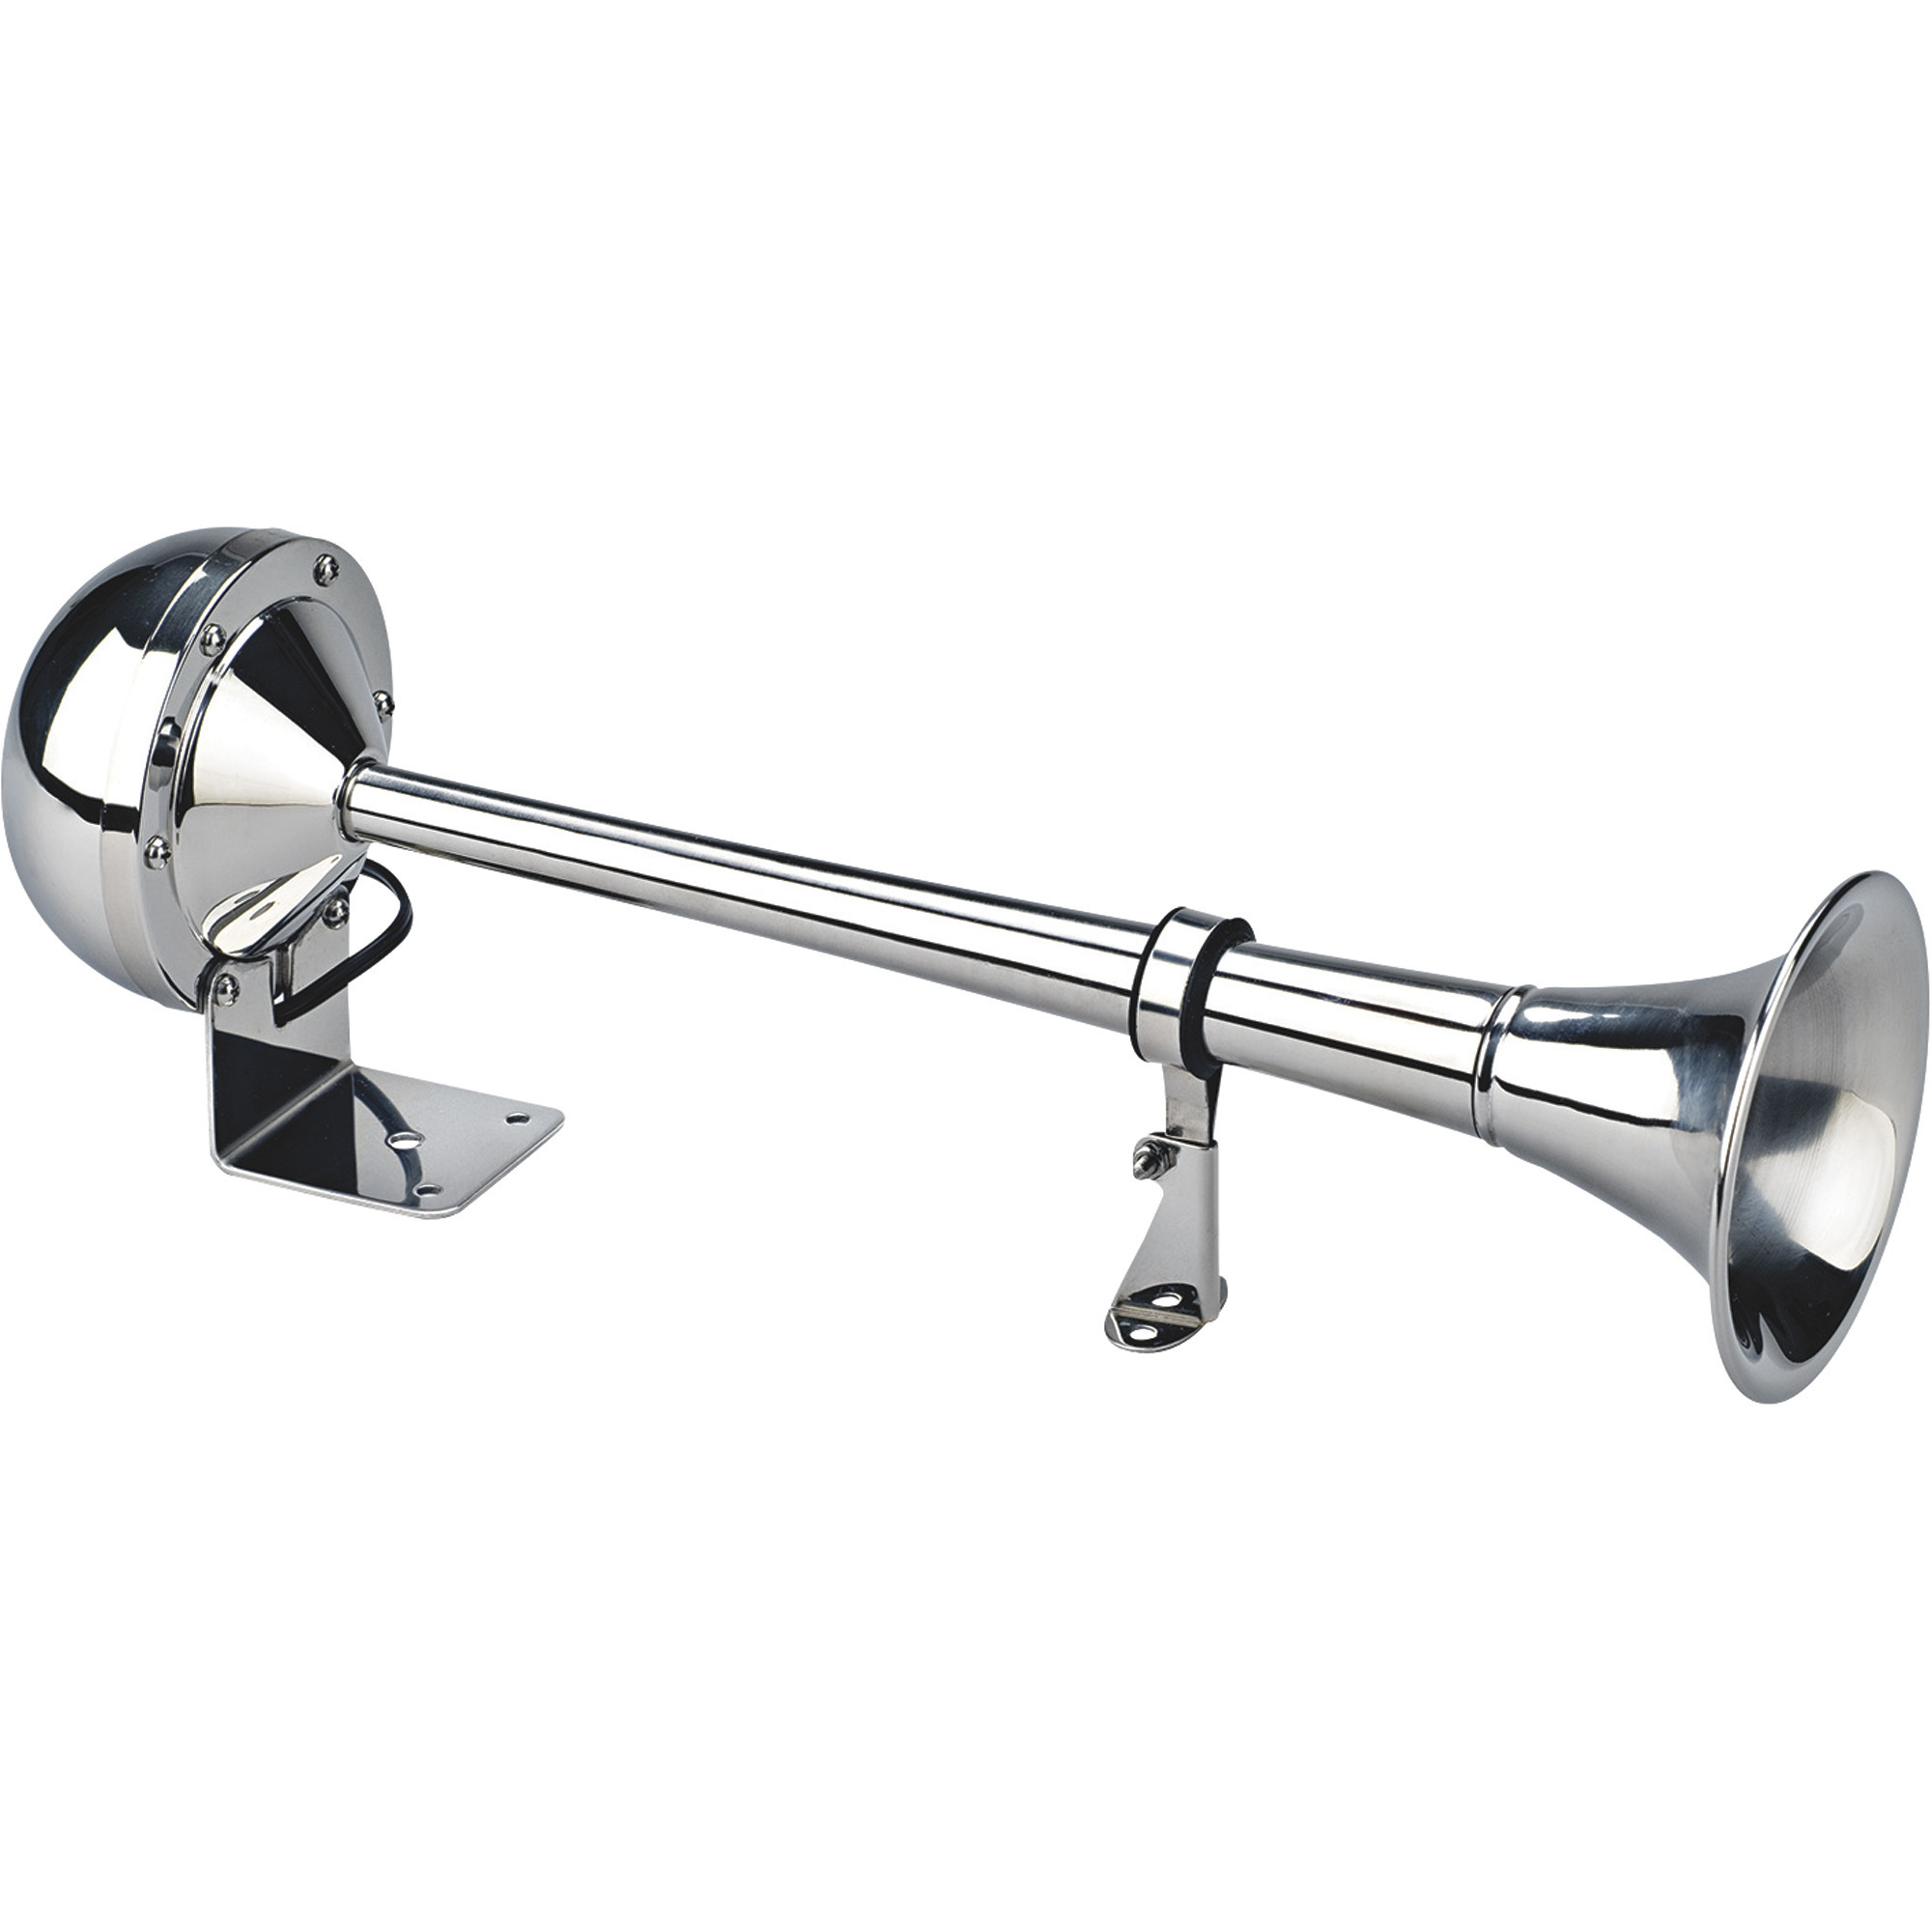 Wolo Persuader Truck and Marine Horn â High Tone, 114dB